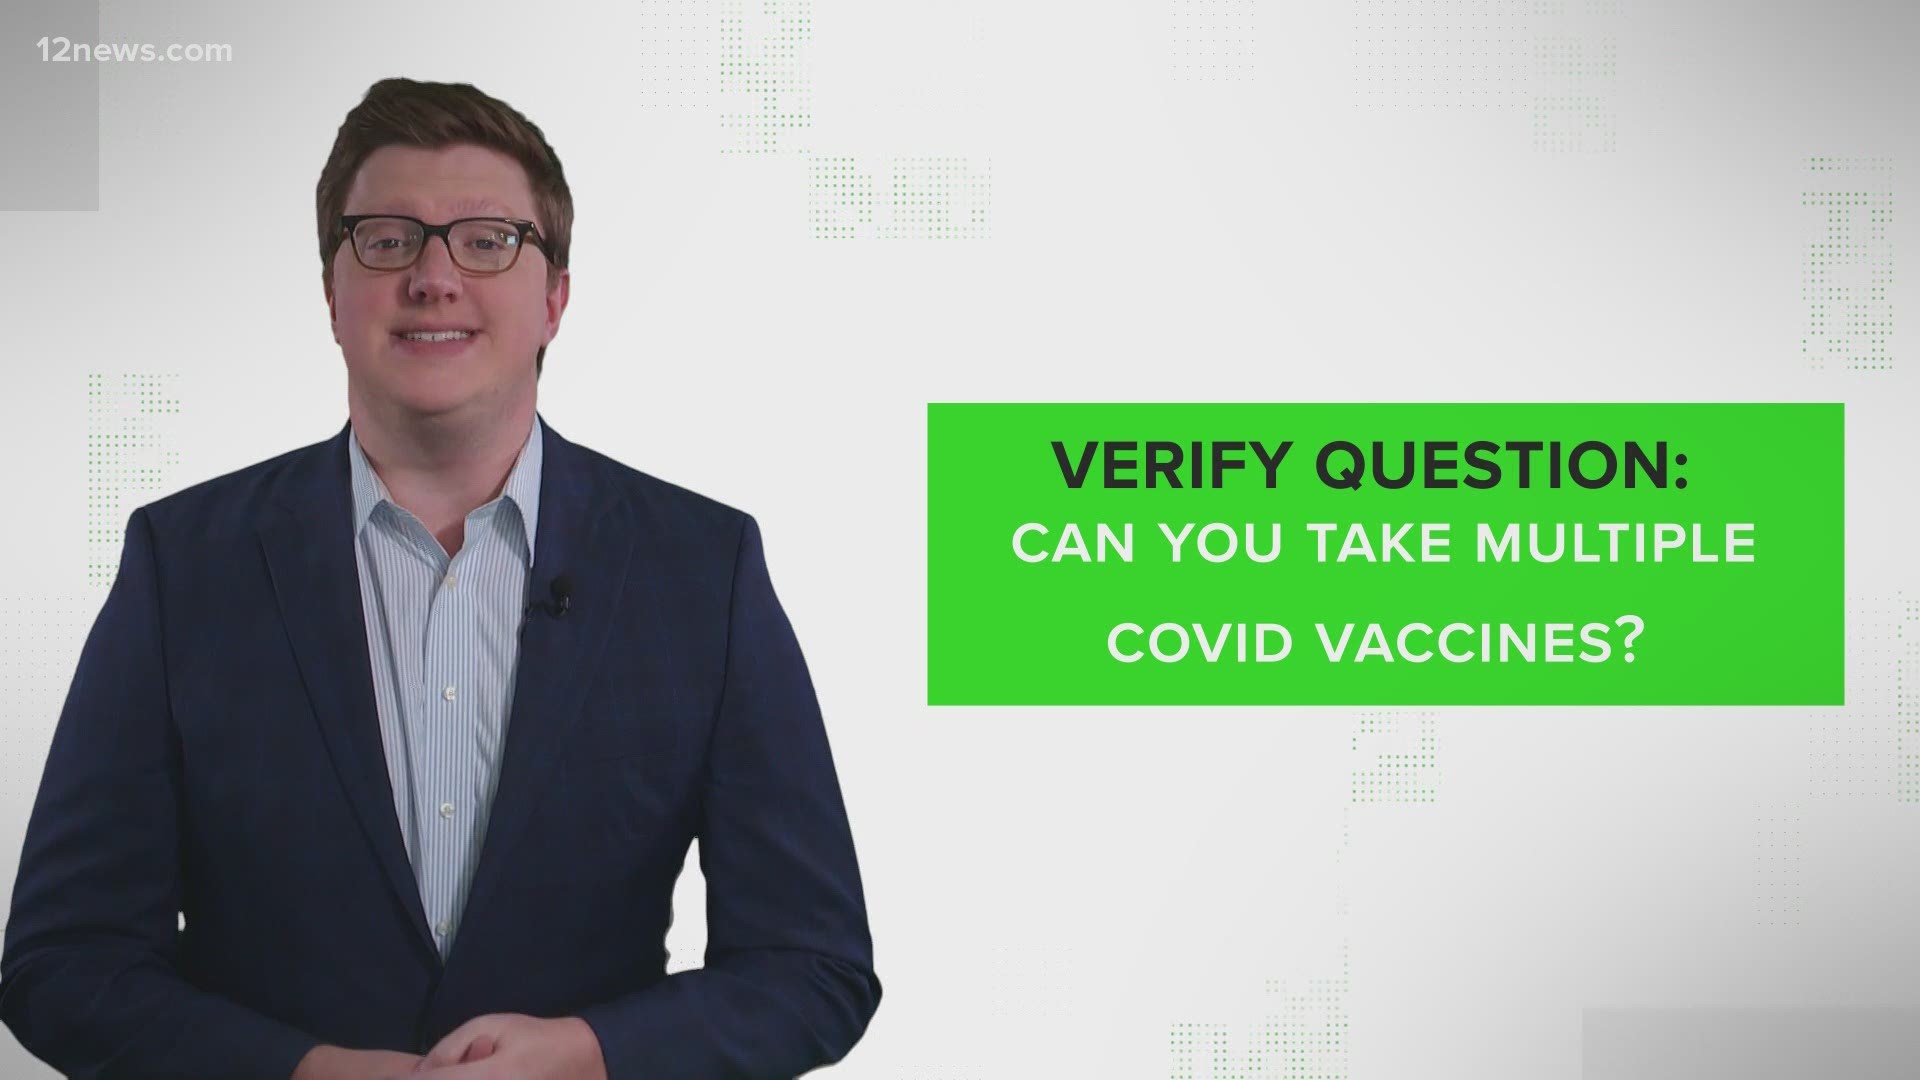 Can you take multiple Covid vaccines? And would that be safe? We've seen this question in lots of online posts, so let's verify!